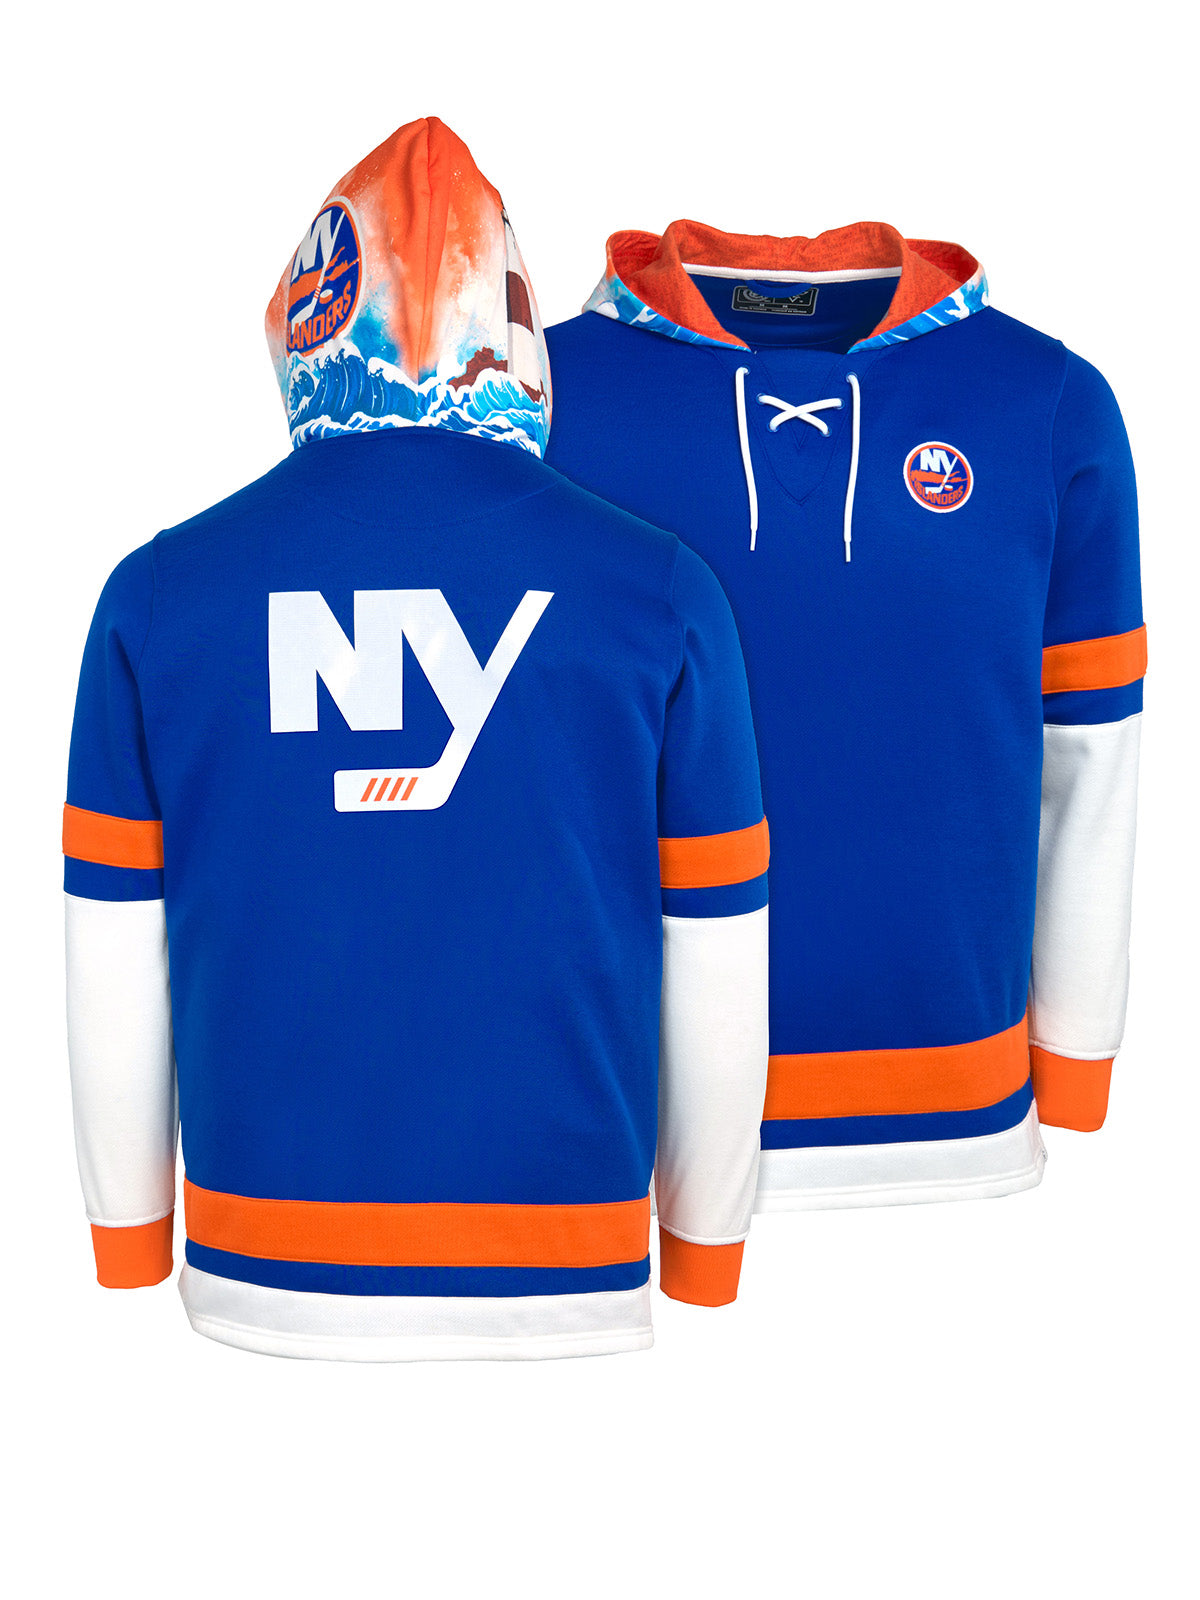 New York Islanders Lace-Up Hoodie - Hand drawn custom hood designs with all the team colors and craftmanship to replicate the gameday jersey of this NHL hoodie